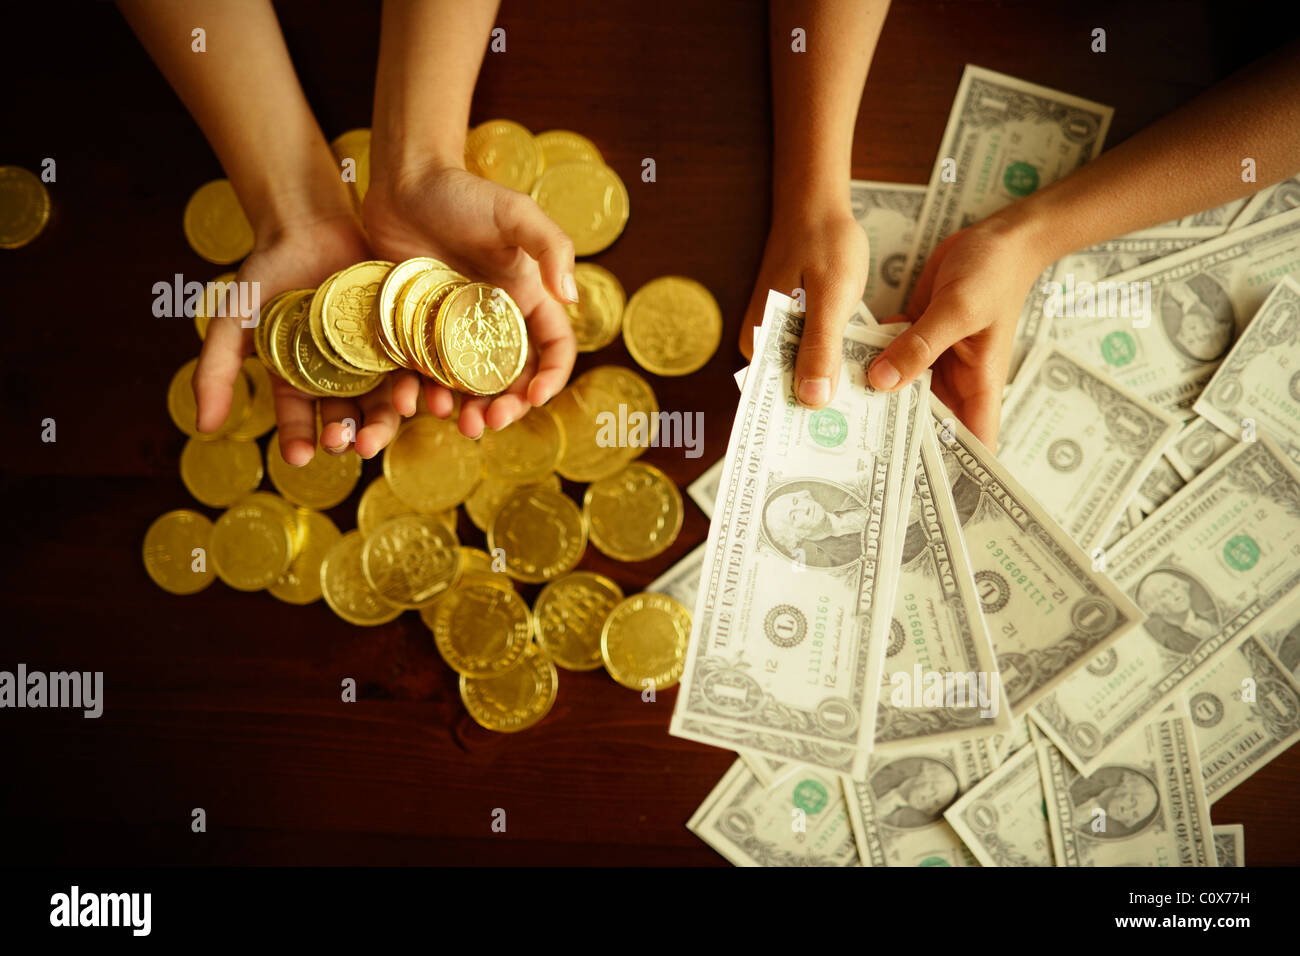 Investment options. Gold versus US dollar. Children hold fake printed dollars and chocolate coins. Stock Photo